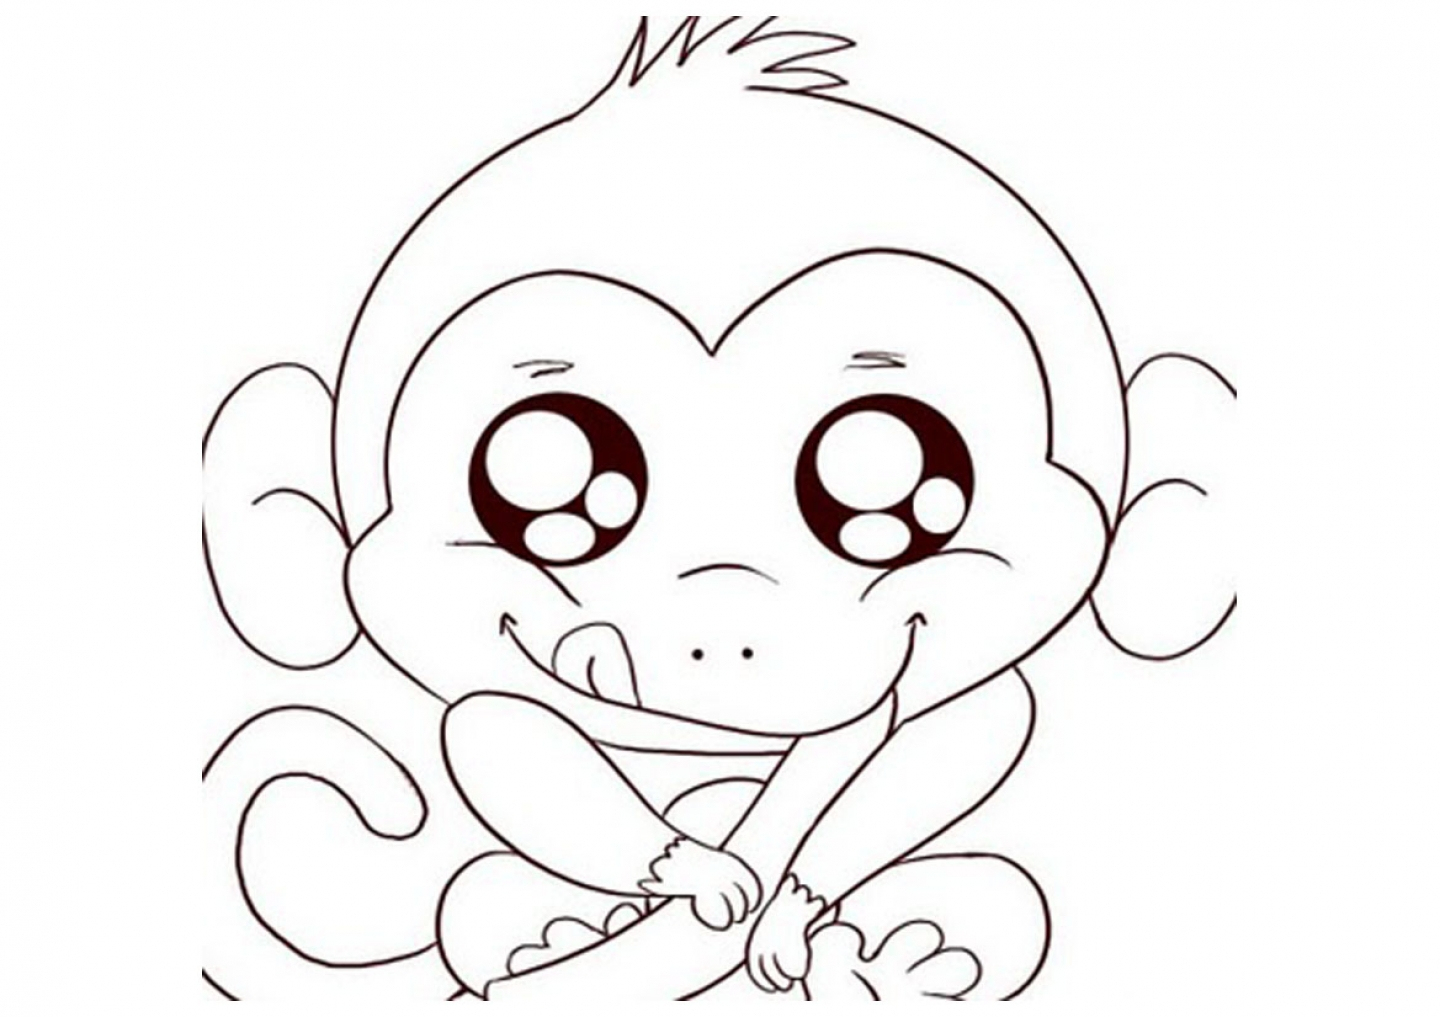 Coloring Pages : Free Printable Monkey Coloring Pages For Kids Pagee - Free Printable Monkey Coloring Pages